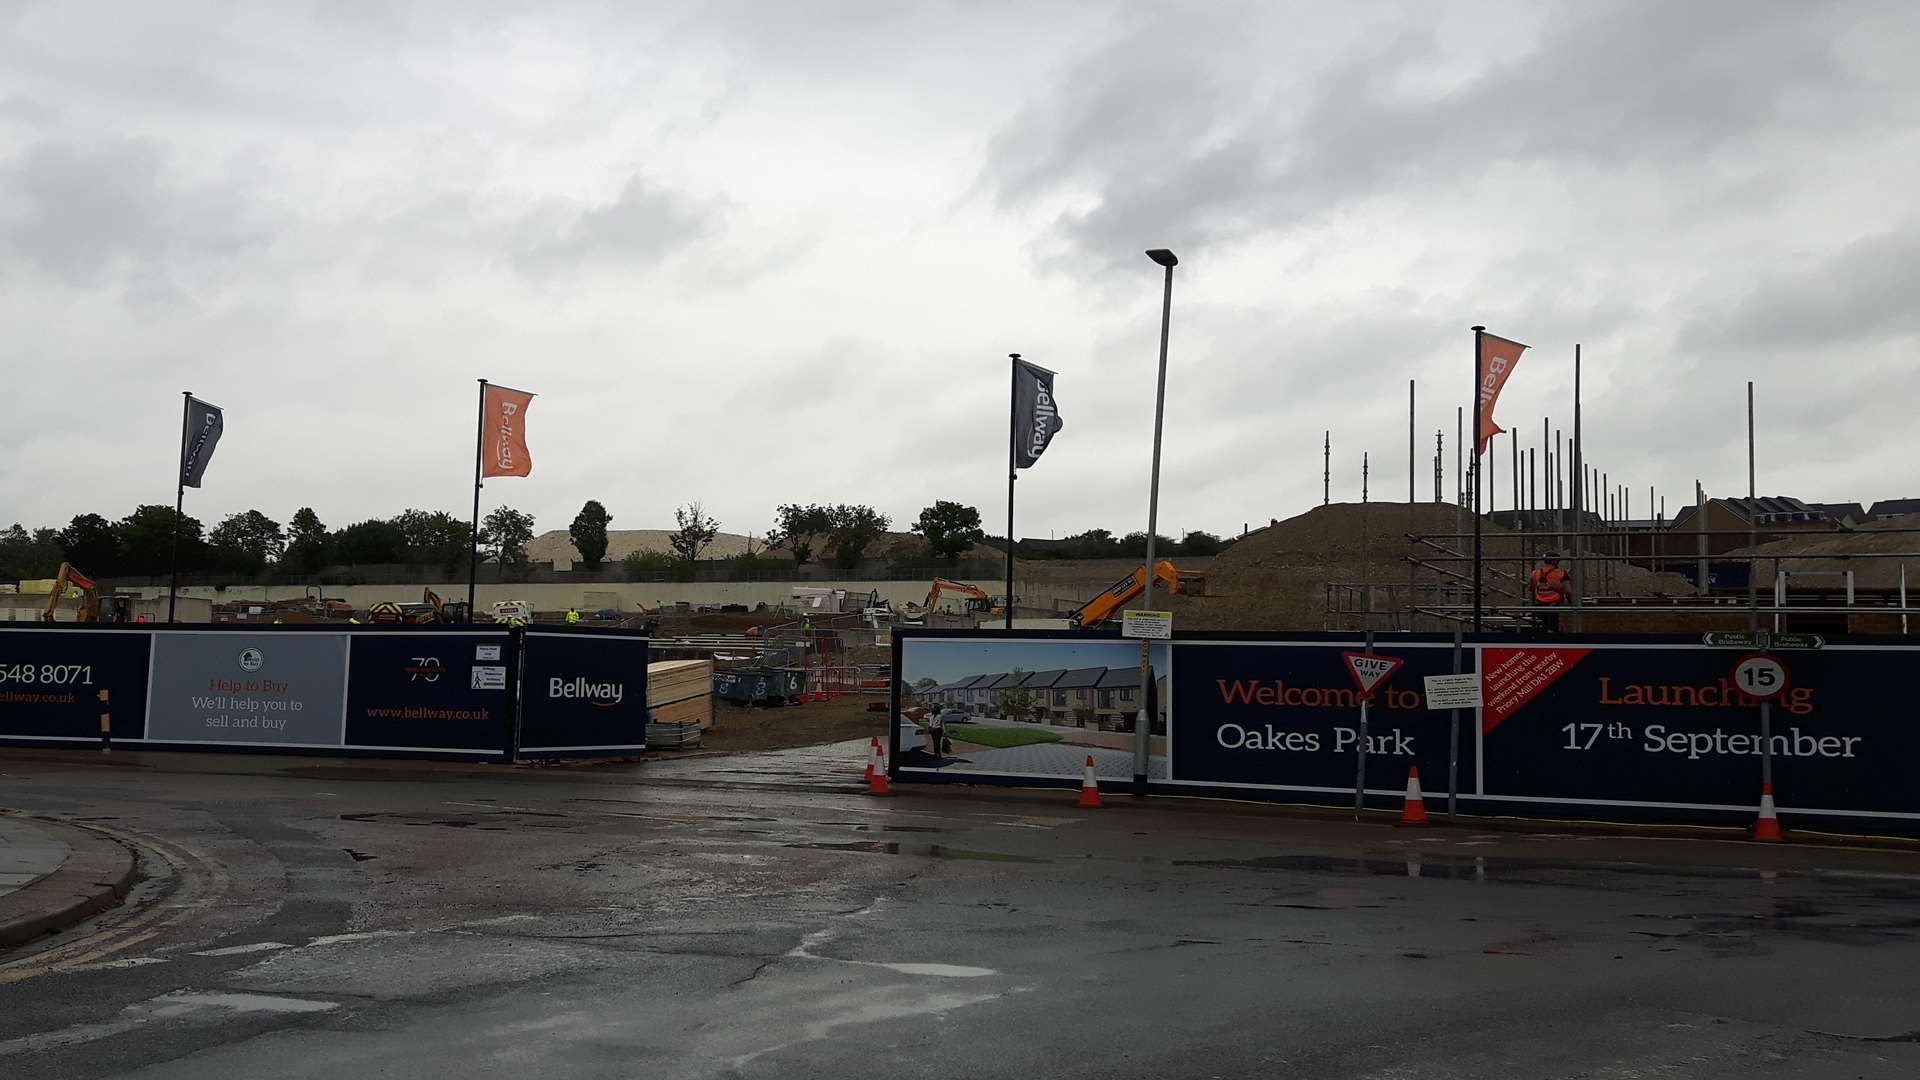 Oakes Park, the next lot of houses from Bellway Homes currently being built in Dartford